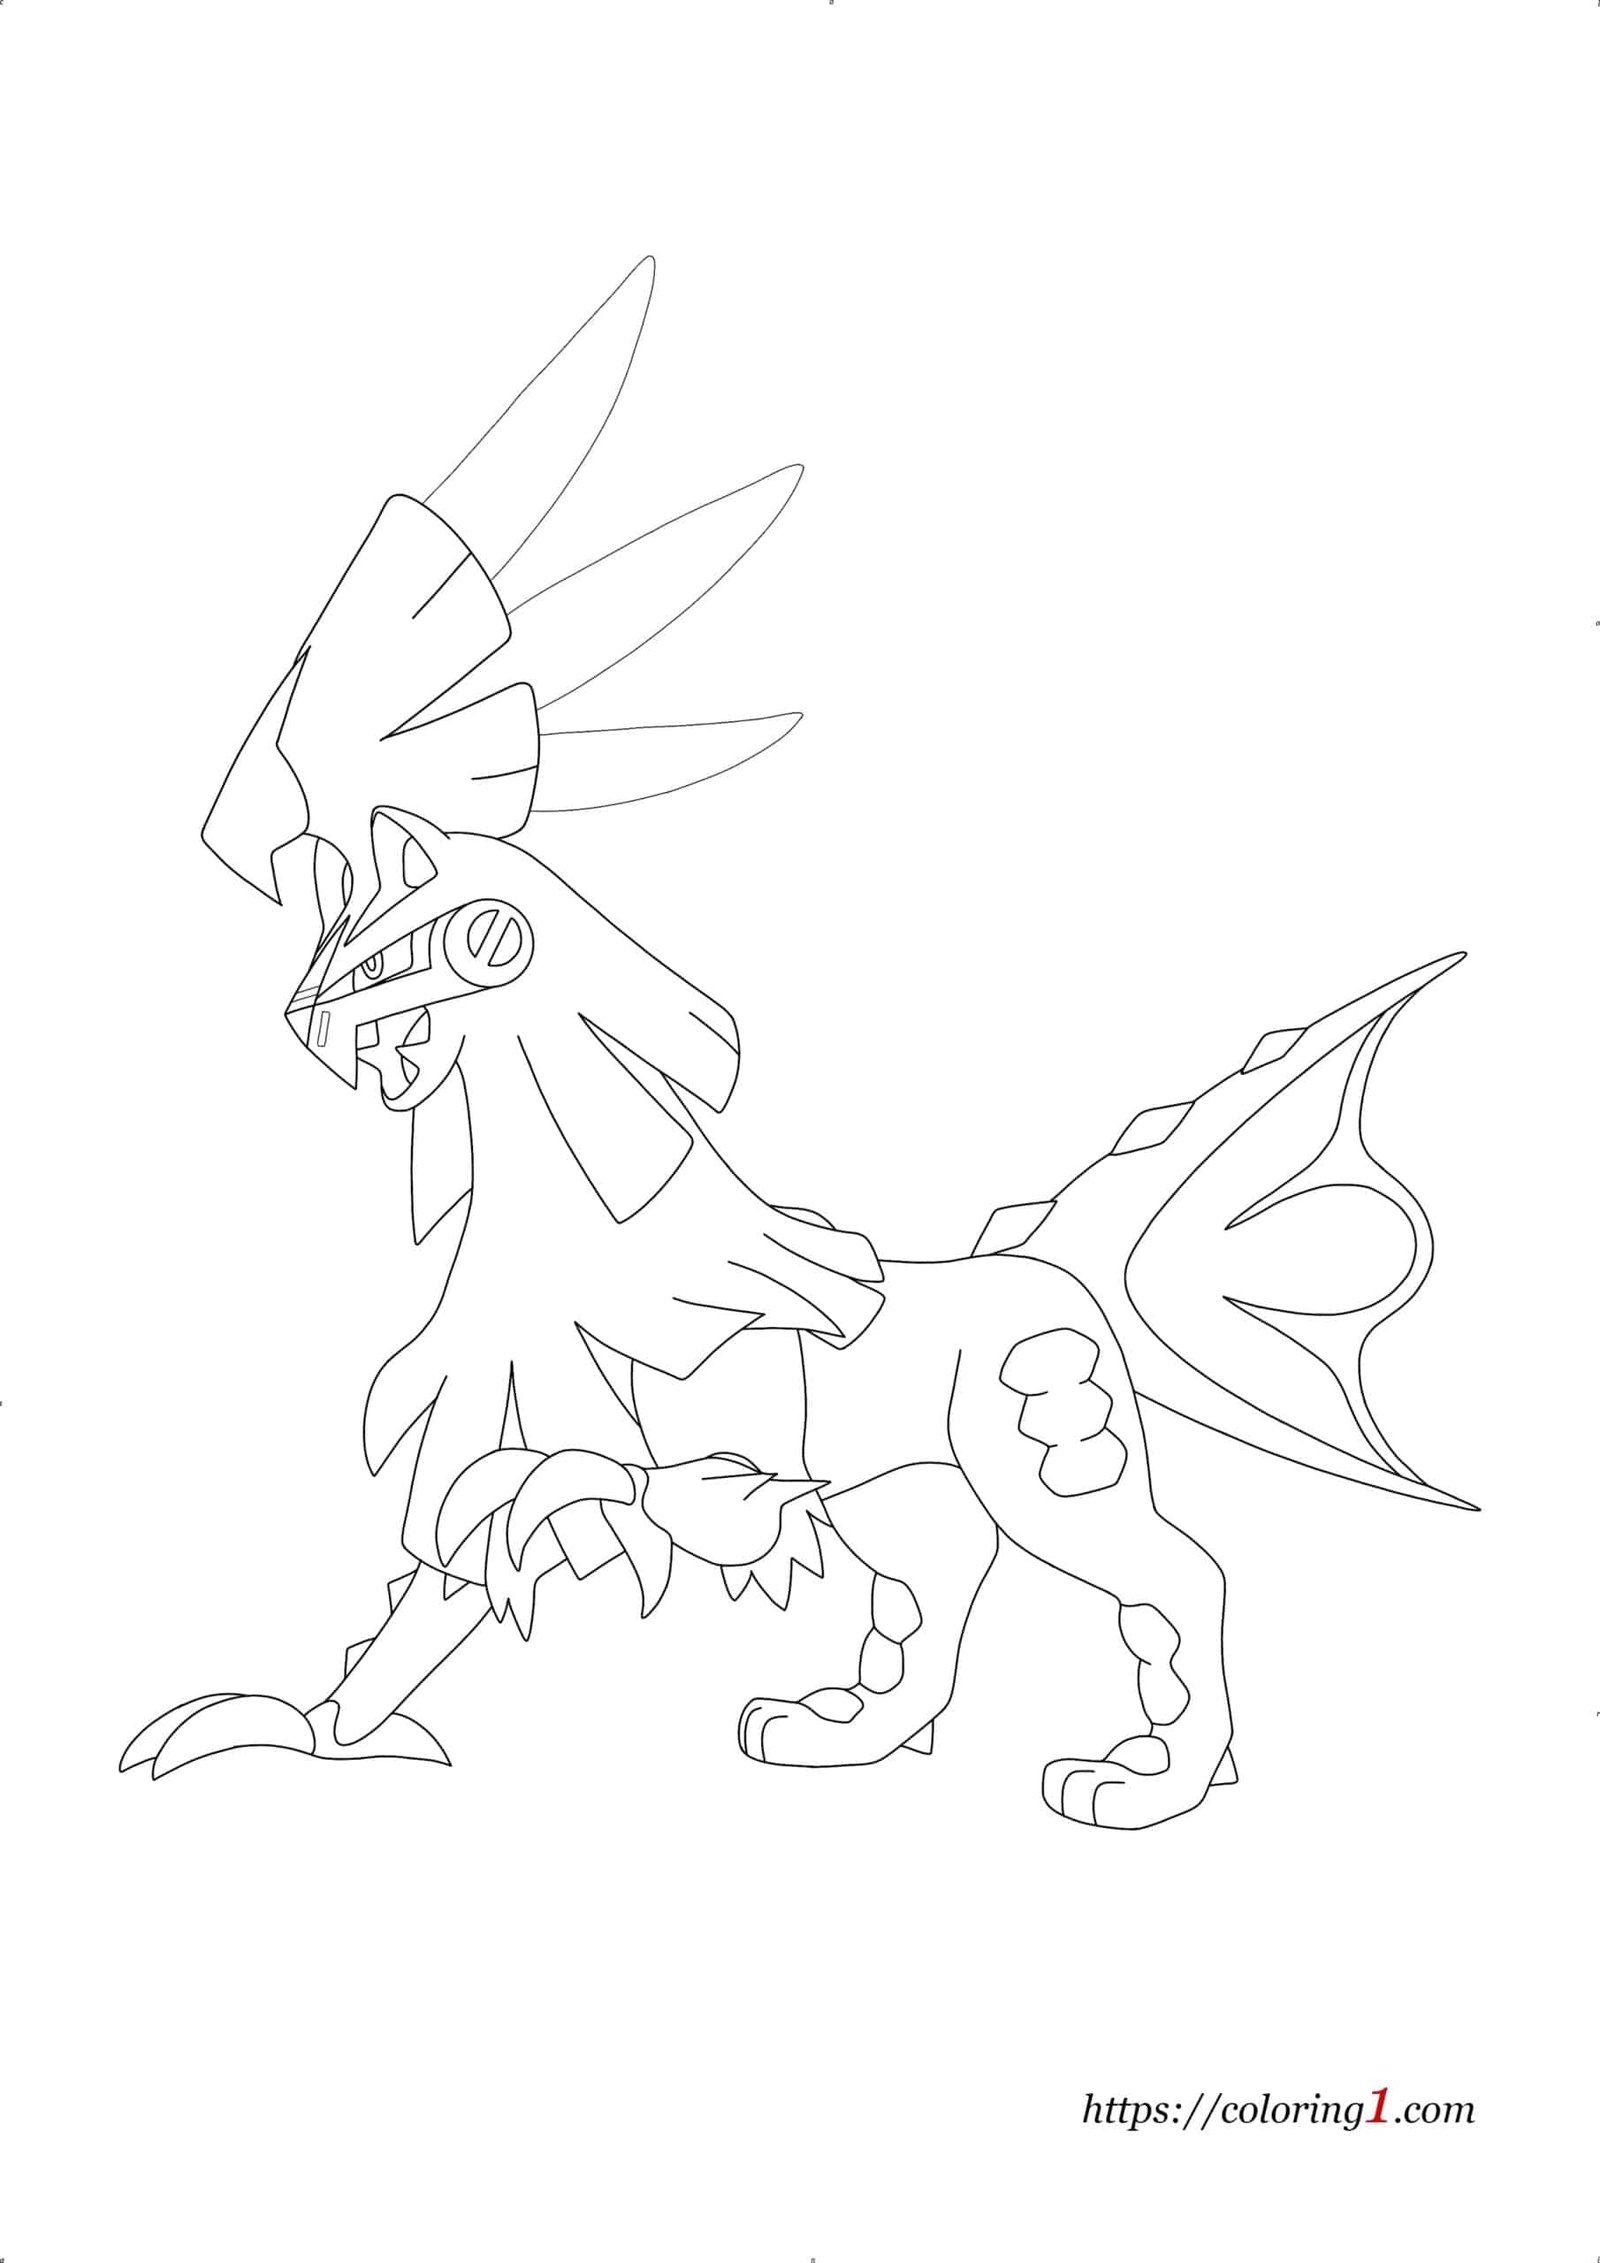 Pokemon silvally coloring pages